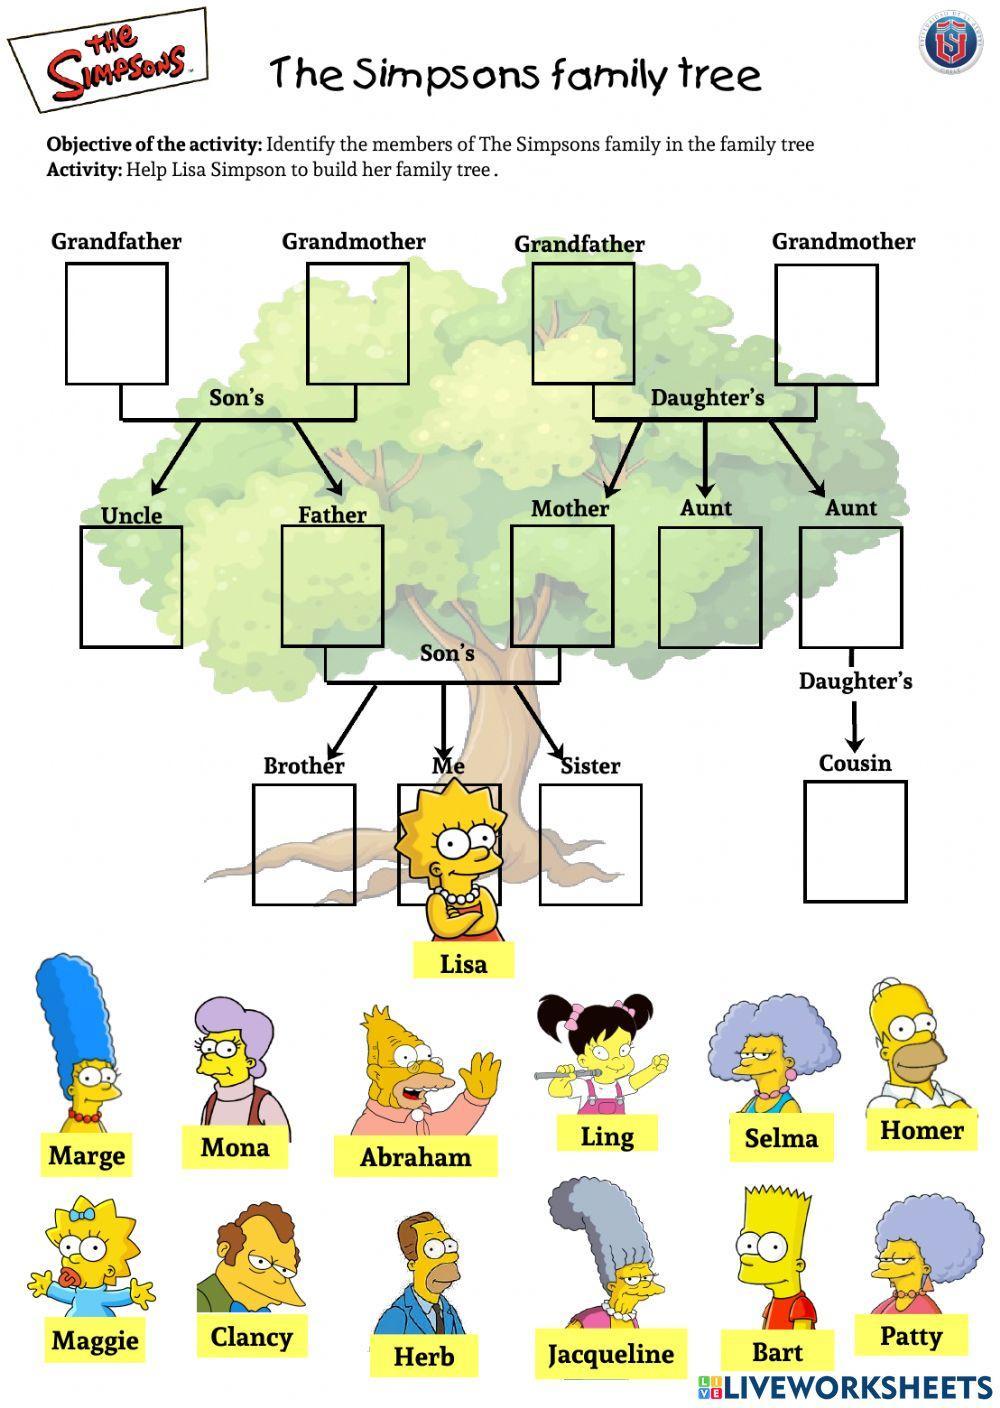 The Simpsons family tree!